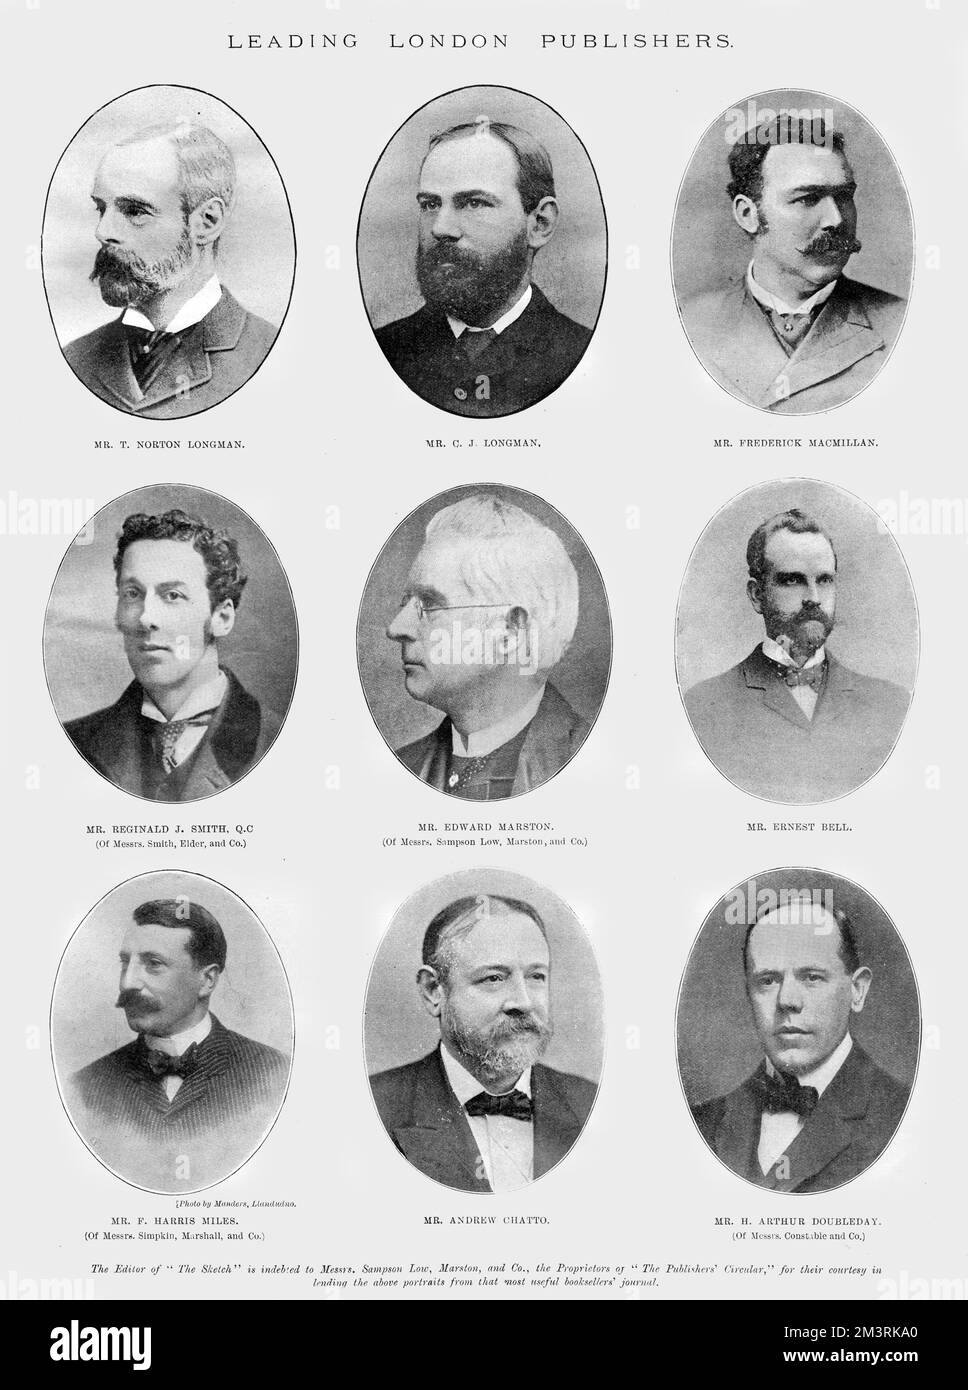 Page from The Sketch magazine featuring portraits of leading London publishers.  Top row from left: Mr T. Norton Longman, Mr C. J. Longman, Mr Frederick Macmillan.  Middle rown from left, Mrs Reginald J. Smith Q.C (of Messrs. Smith, Elder &amp; Co), Mr Edward Marston (of Messrs. Sampson Low, Marston and Co), Mr Ernest Bell.  Bottom row from left: Mr Harris Miles (Of Messrs. Simpkin, Marshall &amp; Co), Mr Andrew Chatto and Mr H. Arthur Doubleday (Of Messrs Constable and Co).  1899 Stock Photo